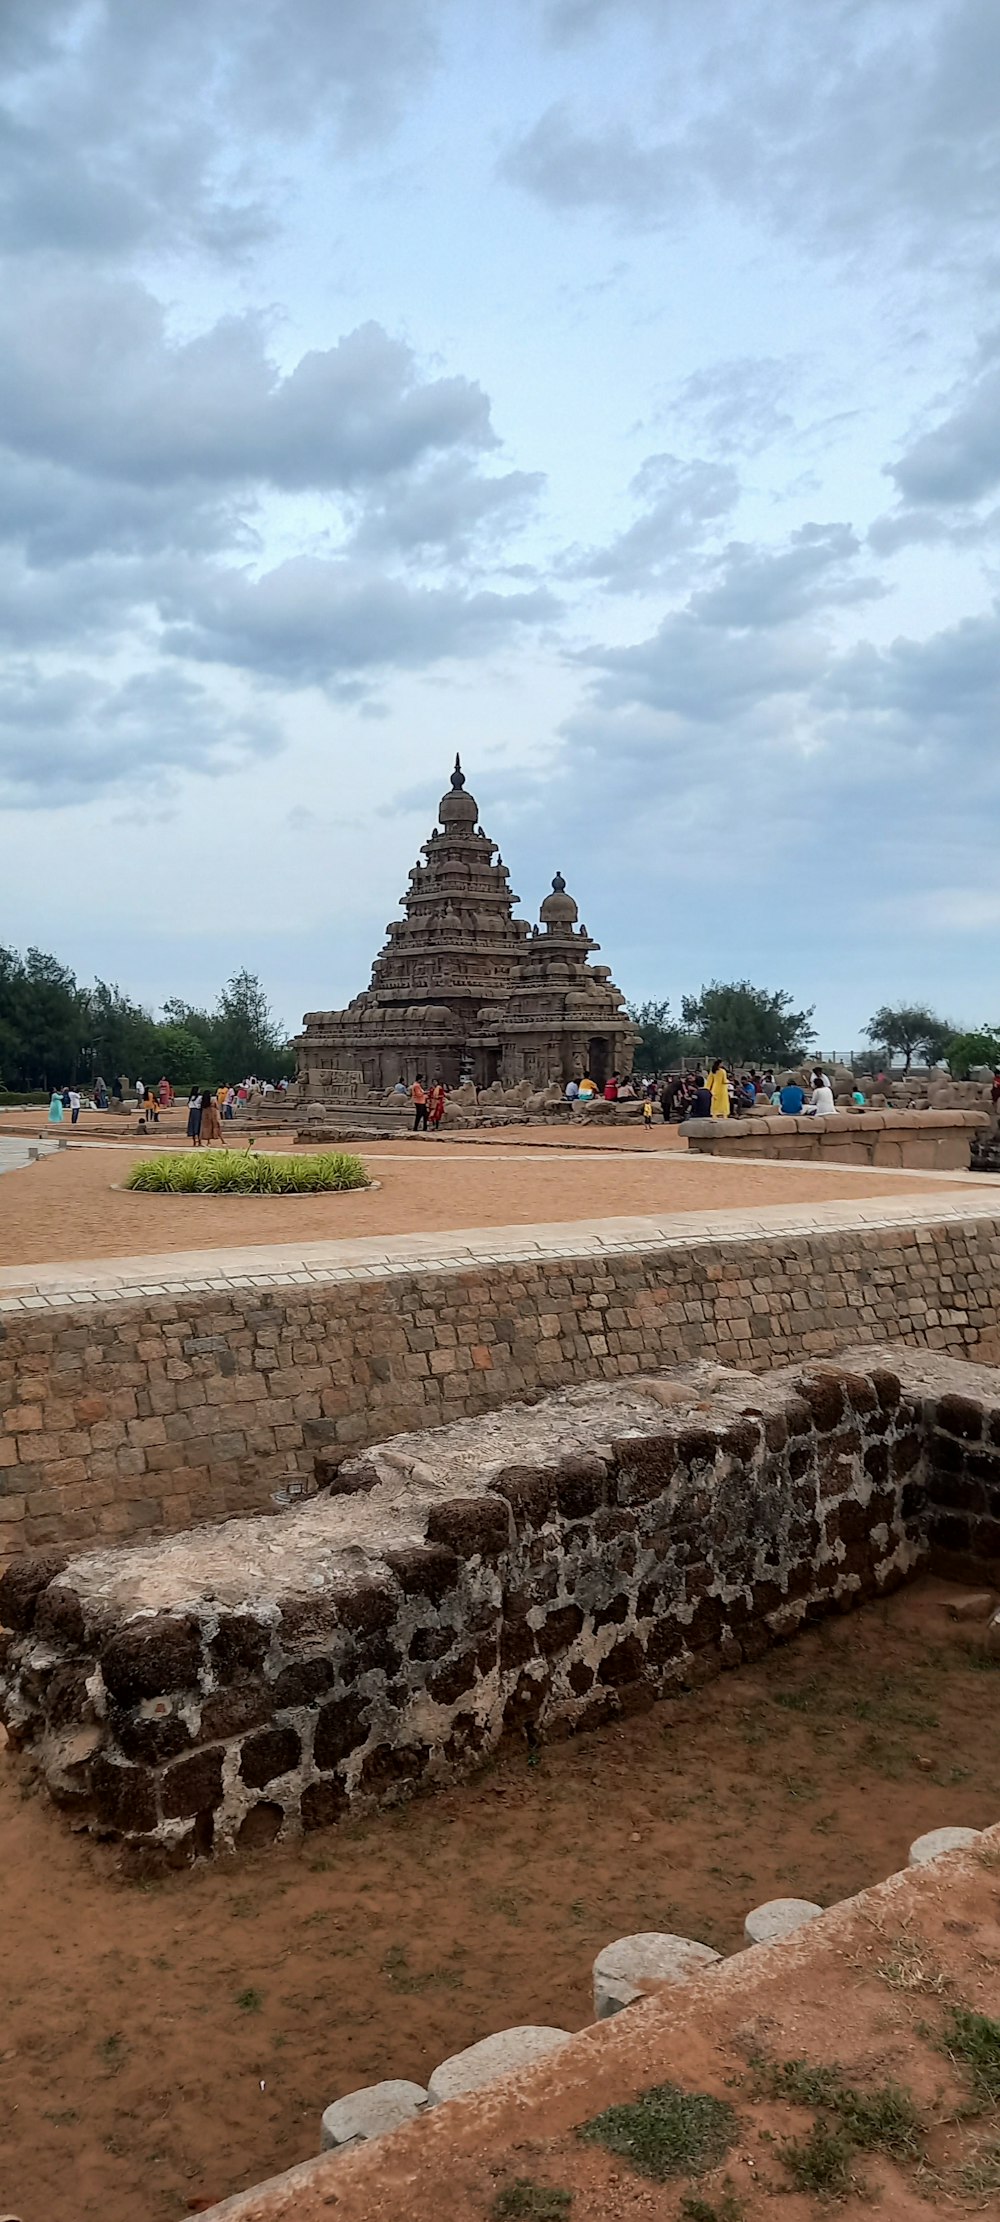 a large pyramid with people around it